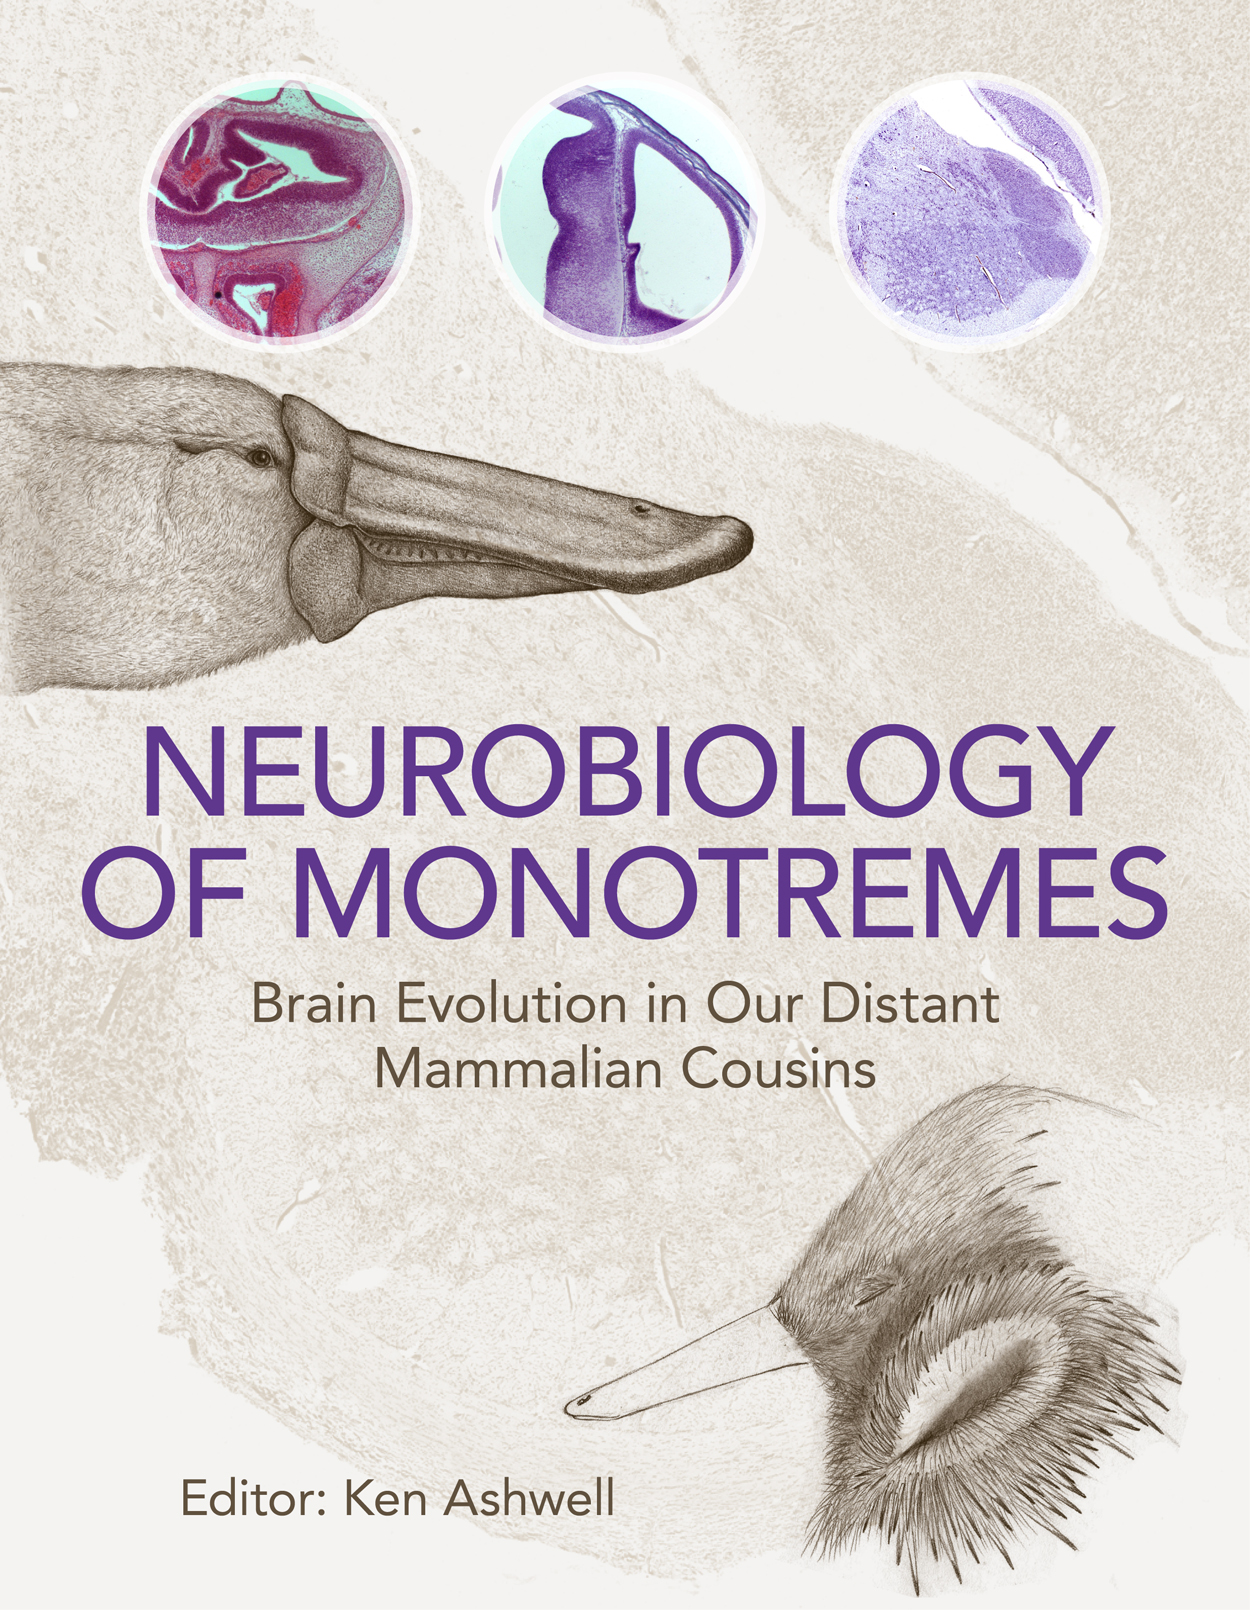 The cover image featuring a picture of a platypus and an echinda and three images of the neurobiology of them.